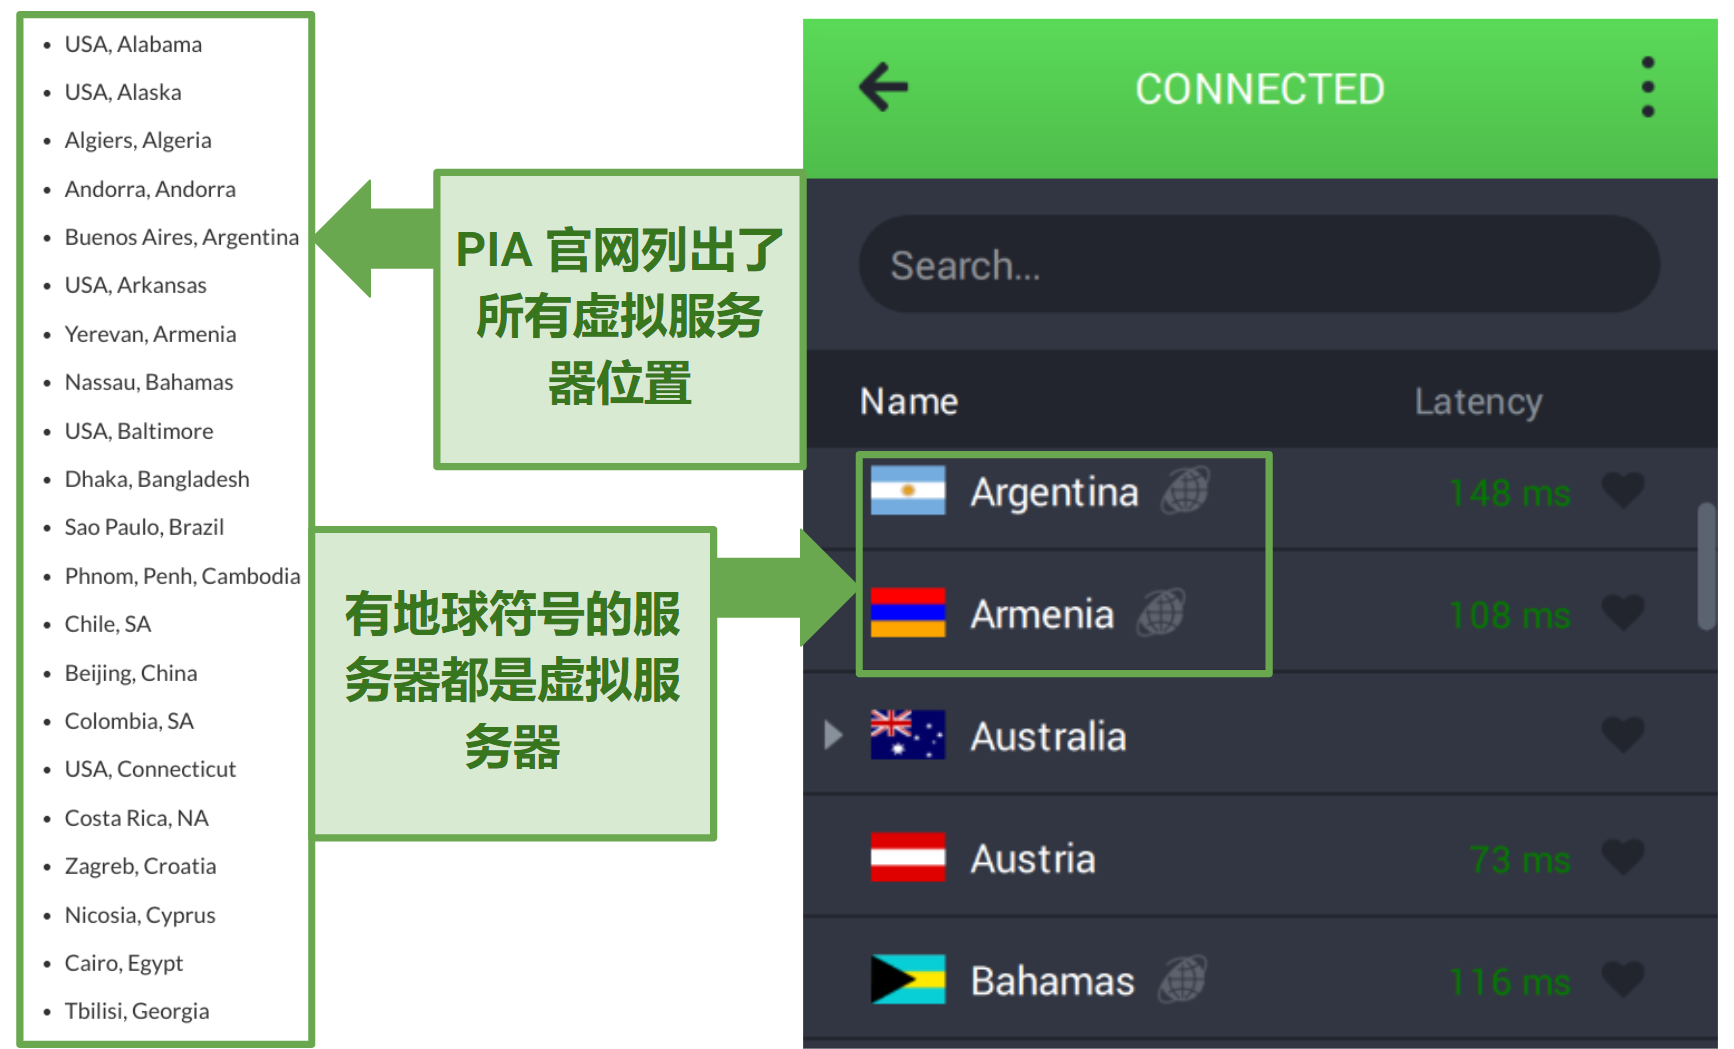 Screenshots of PIA's website and app showing its virtual server locations